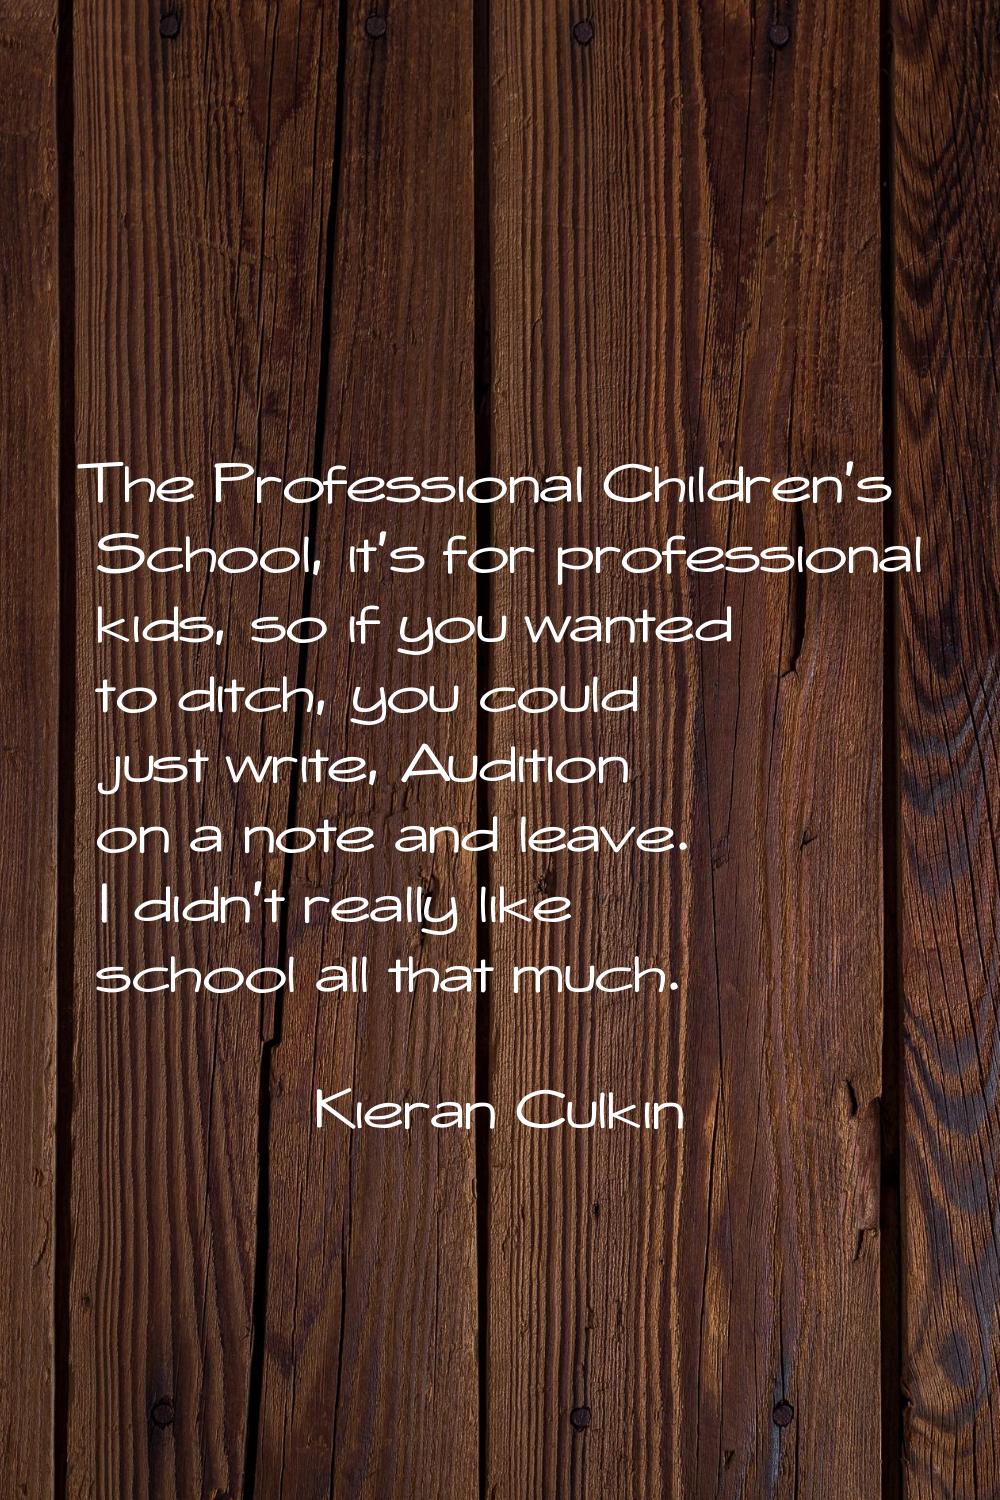 The Professional Children's School, it's for professional kids, so if you wanted to ditch, you coul